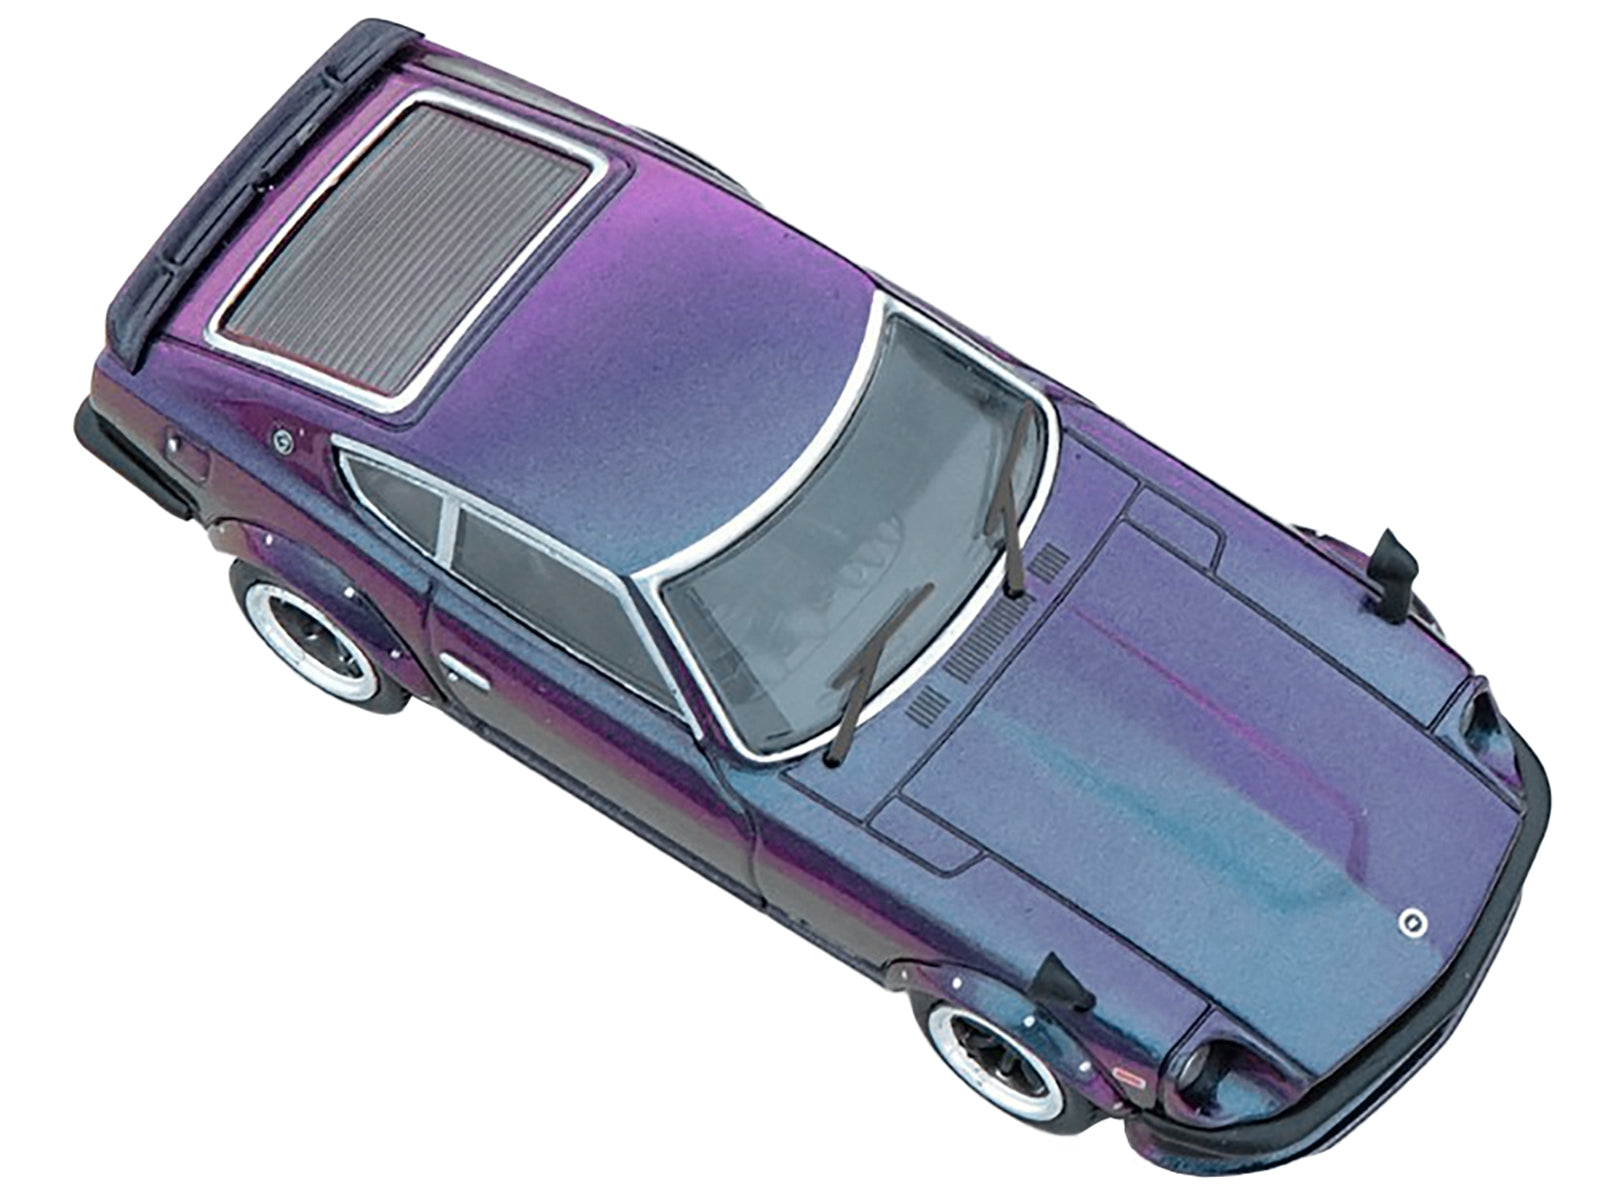 Nissan Fairlady Z (S30) RHD (Right Hand Drive) Midnight Purple II Metallic "Hong Kong Ani-Com and Games 2022" Event Edition 1/64 Diecast Model Car by Inno Models - Homreo